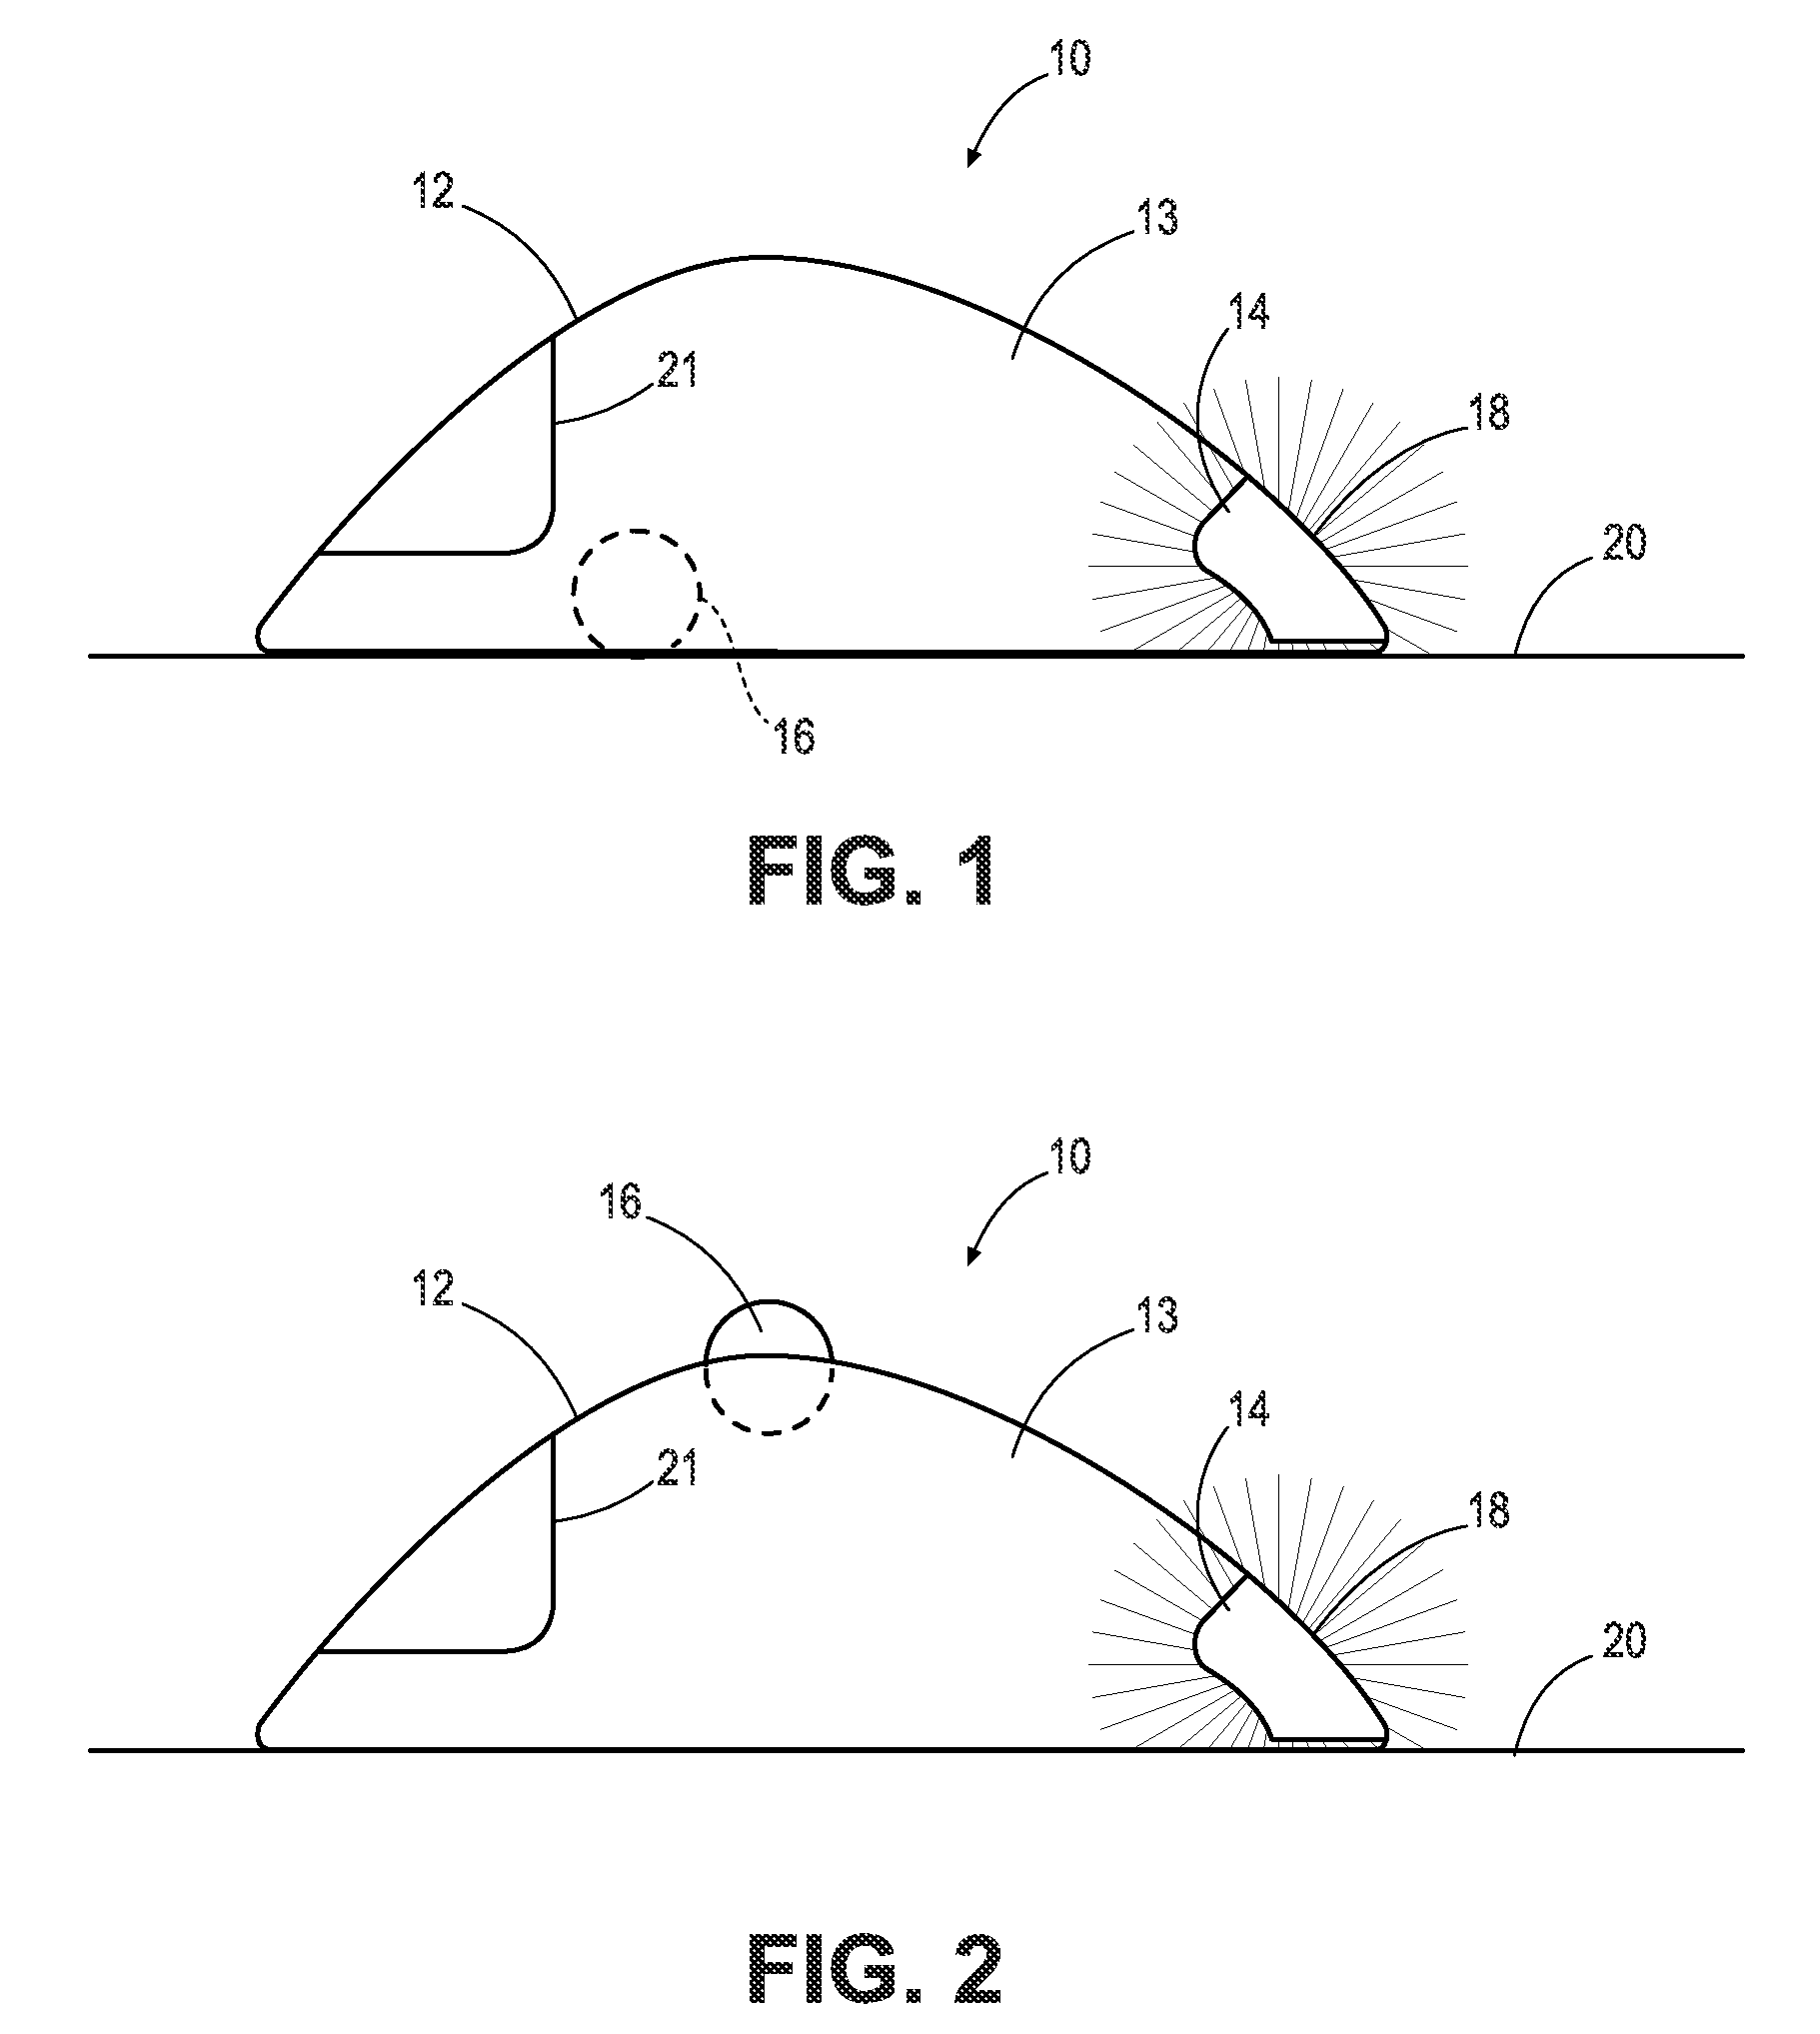 User Notification System with an Illuminated Computer Input Device